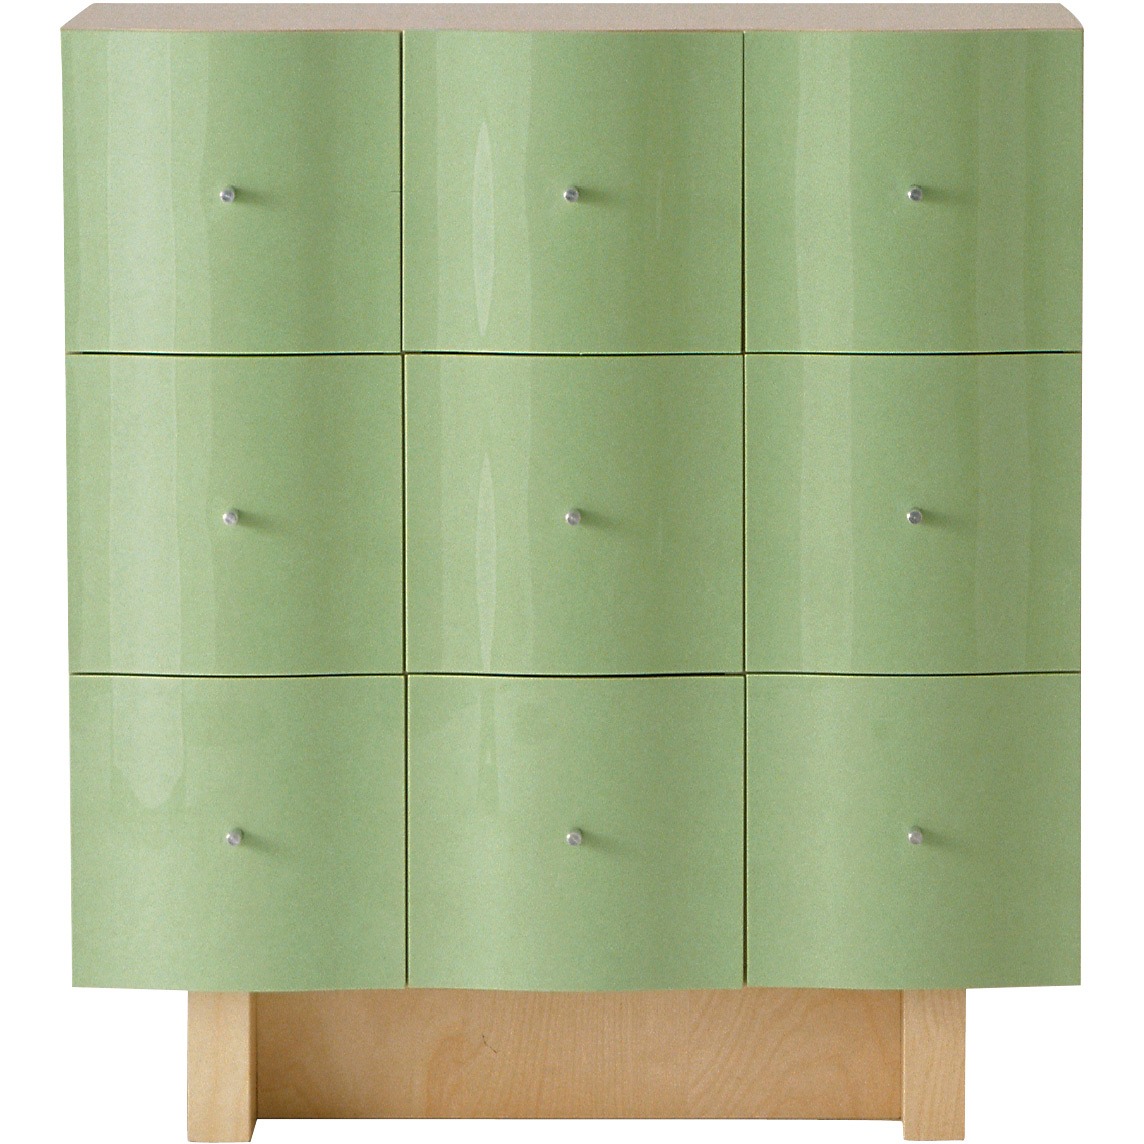 Green chest of nine drawers with a bulbous, wavy front, standing on a base of natural wood, VAJER.